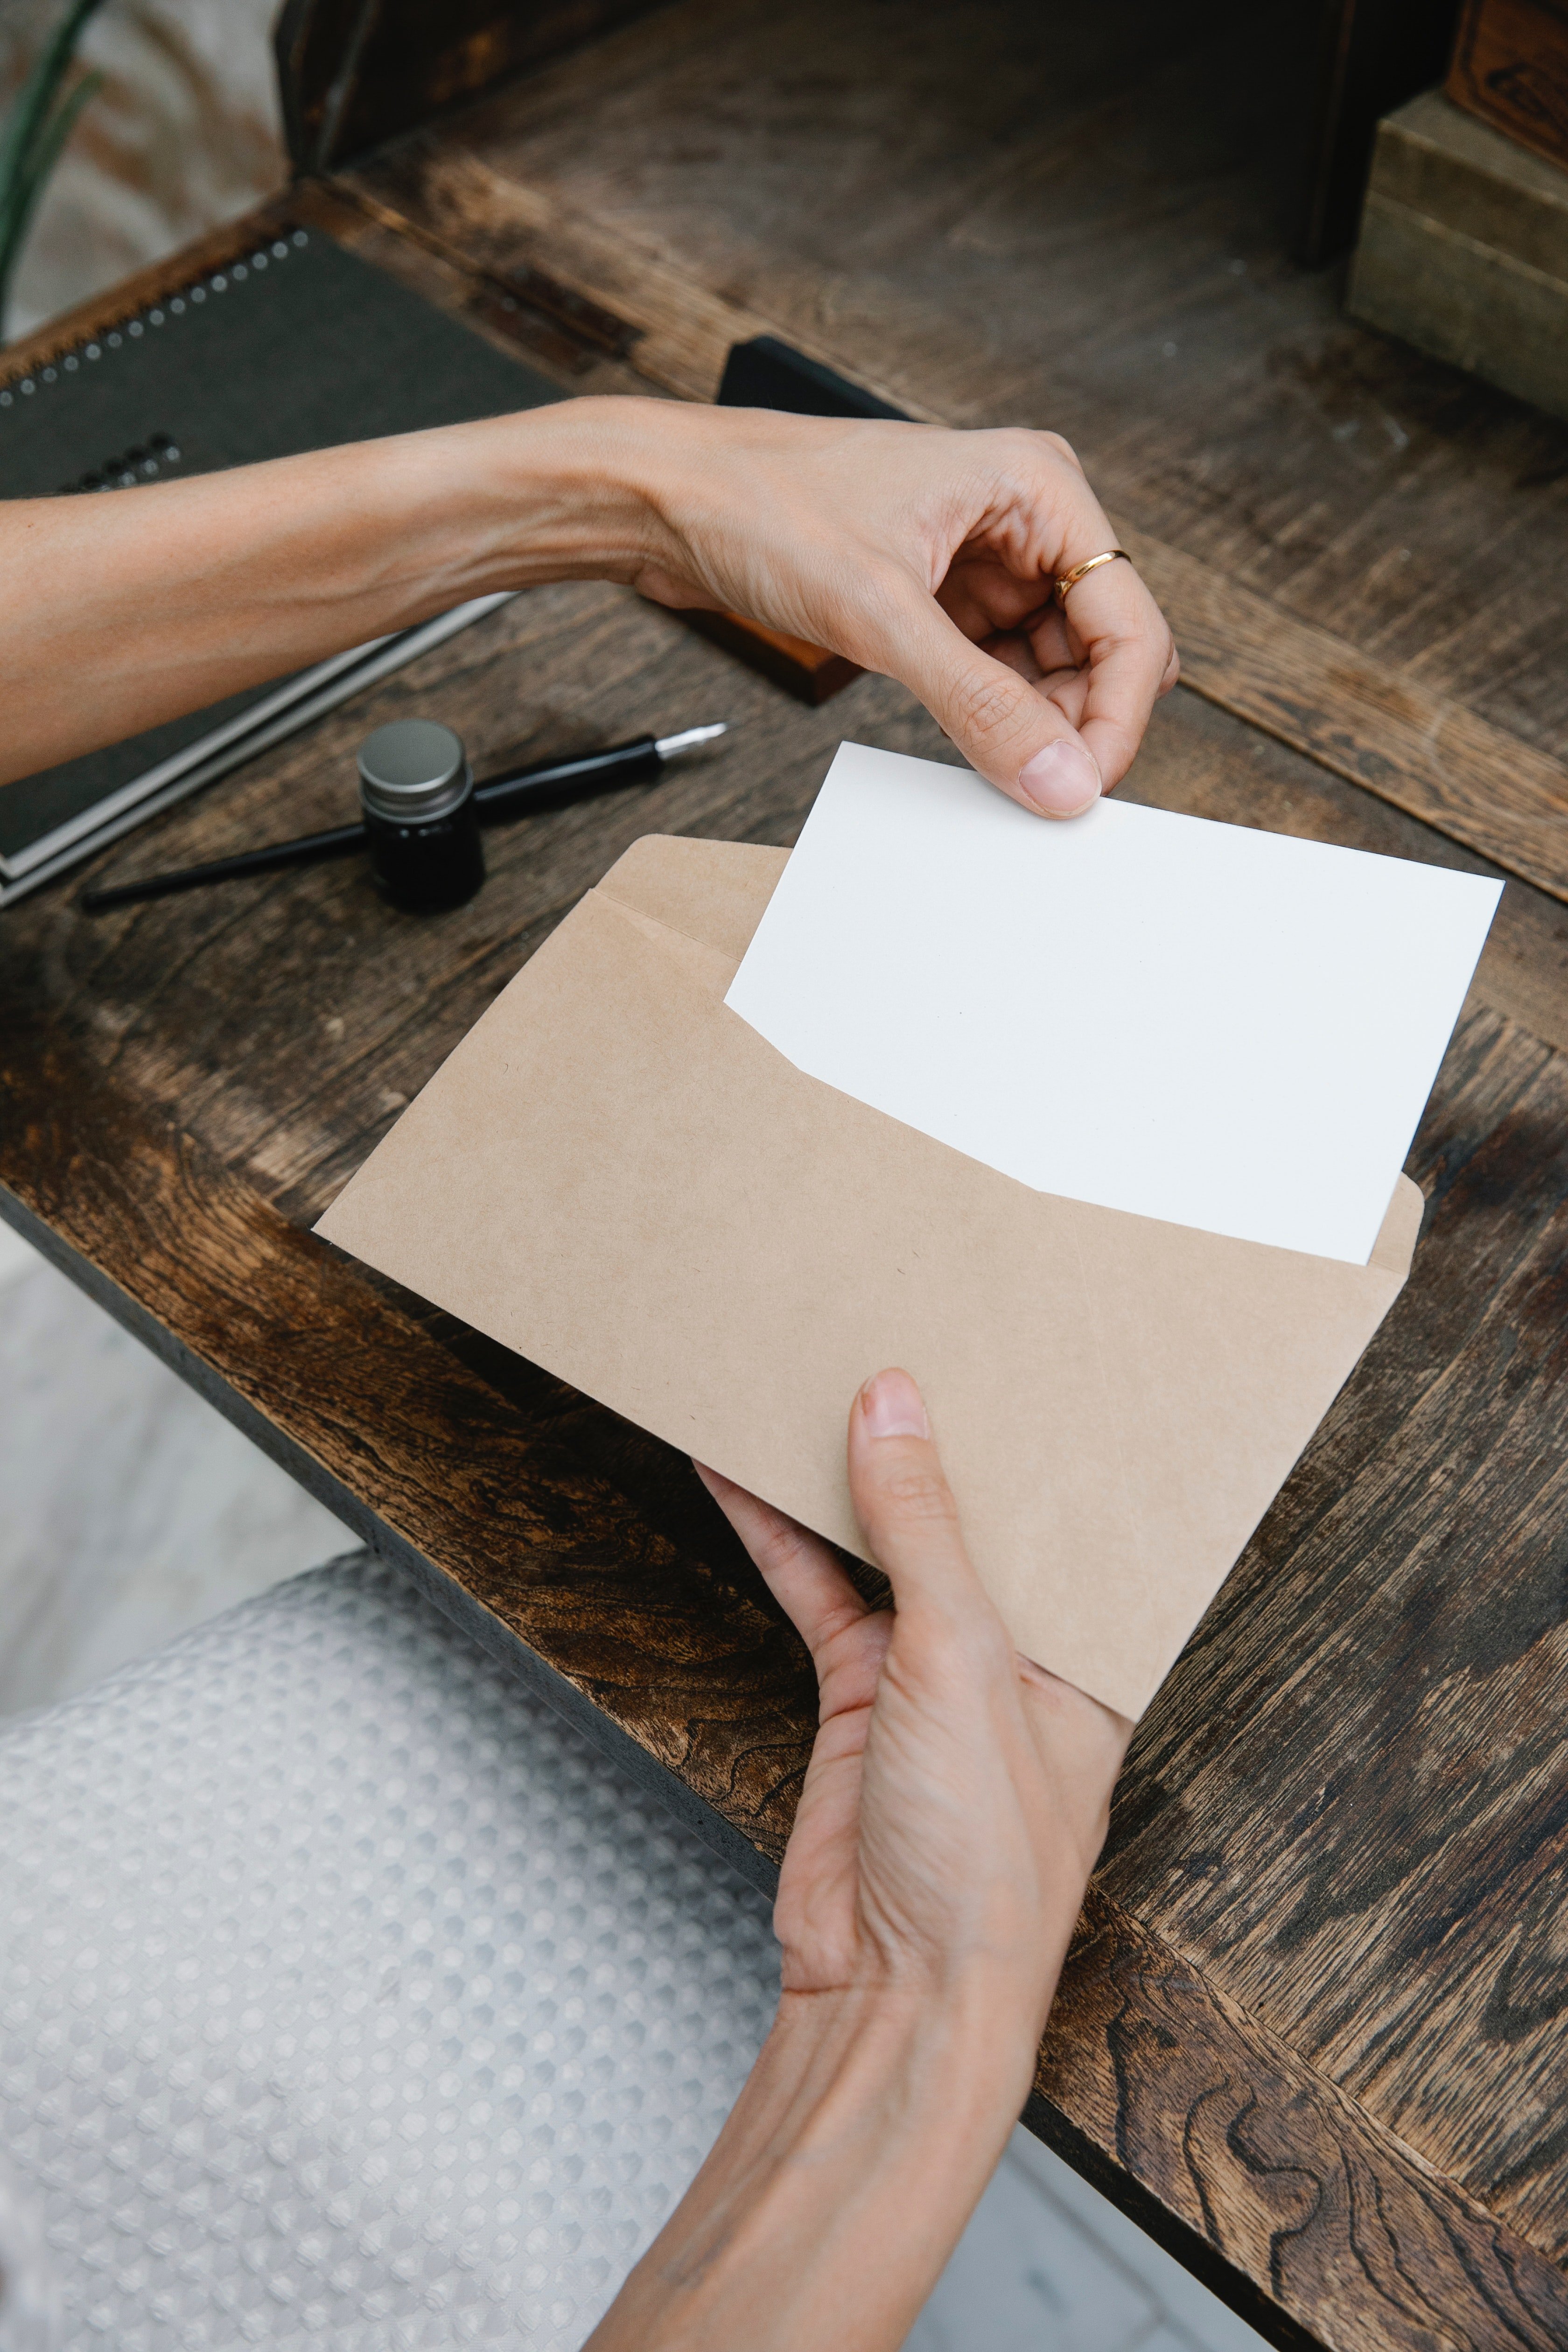 There was a handwritten letter from Cindy inside the box. | Source: Pexels